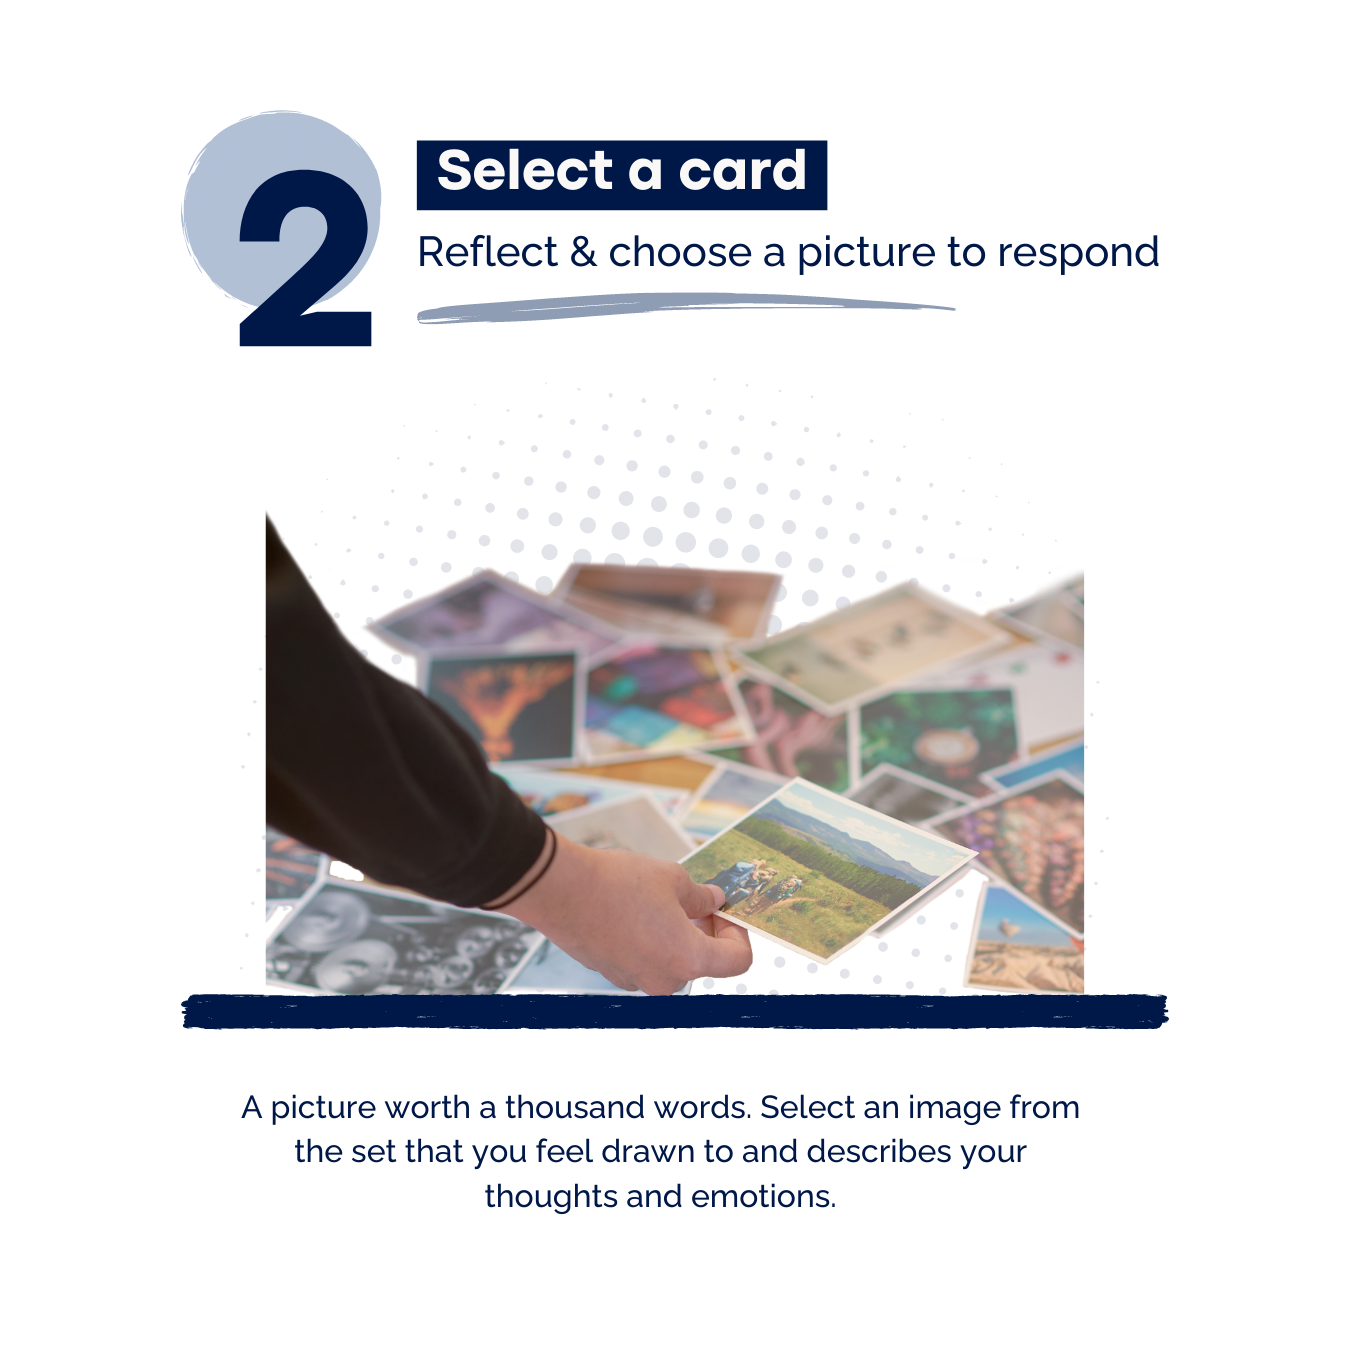 Sample method on how to use picture cards